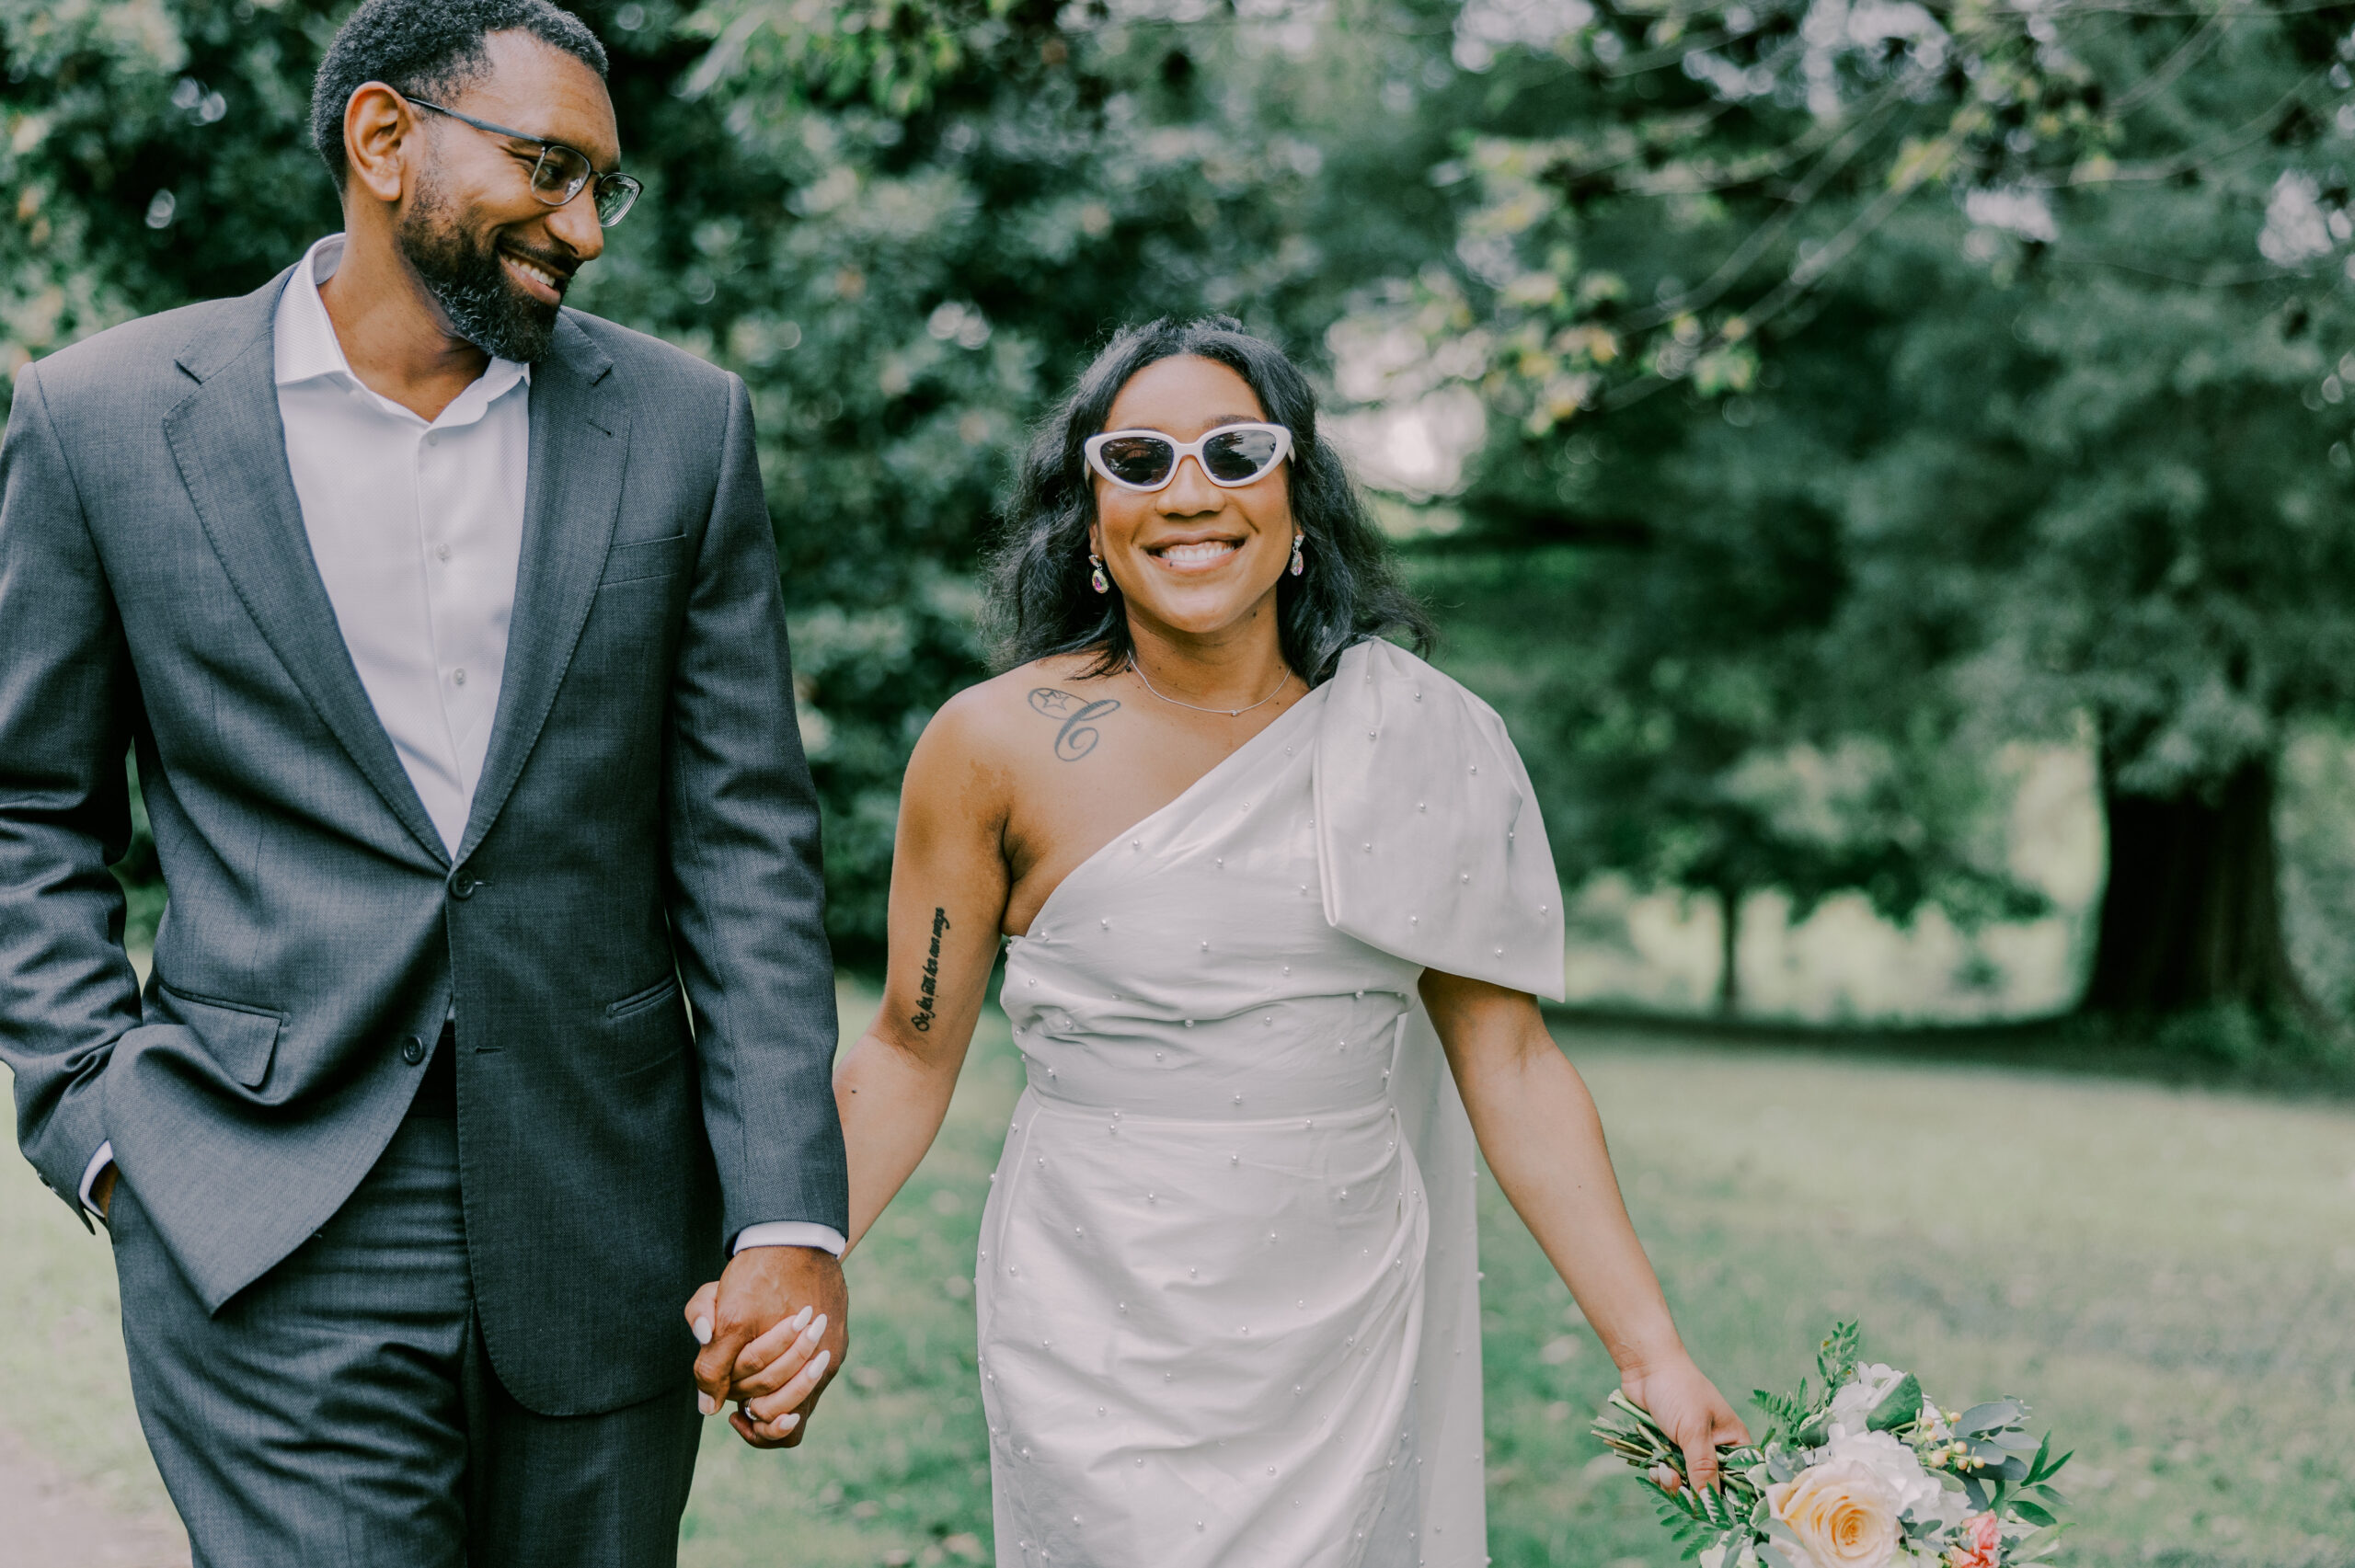 Woman smiling at camera wearing white sunglasses, as man looks over at her smiling at their maymont september engagement session